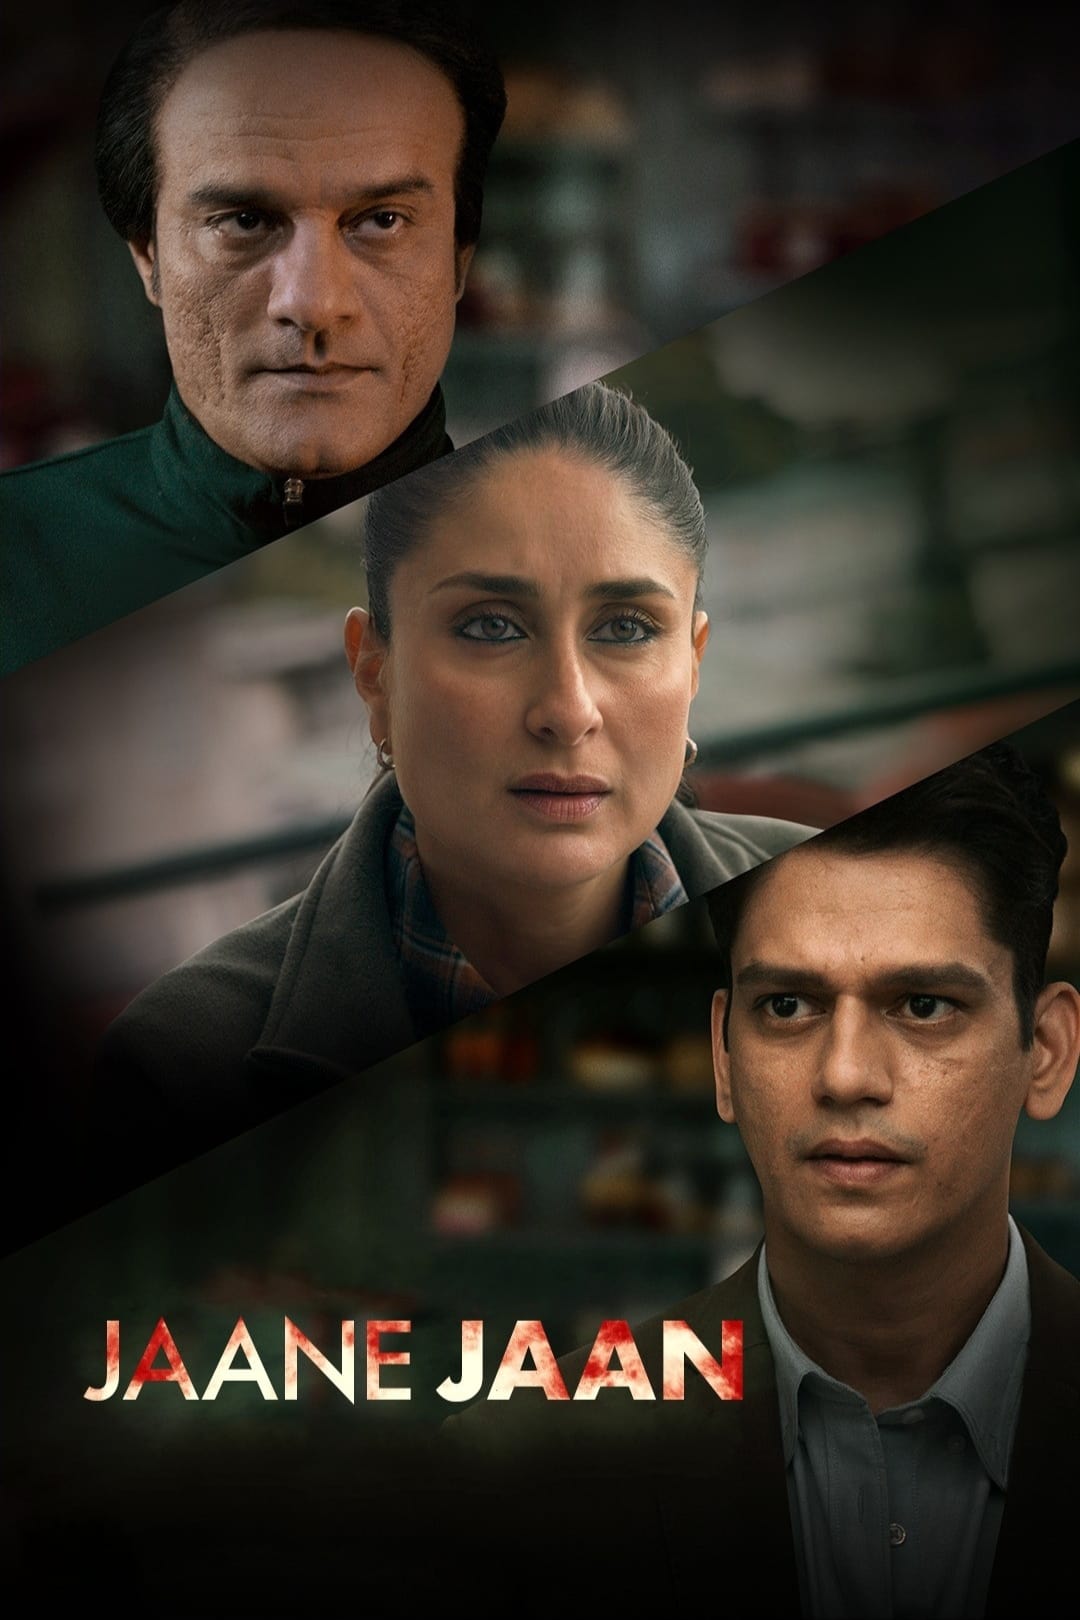 Poster for the movie "Jaane Jaan"